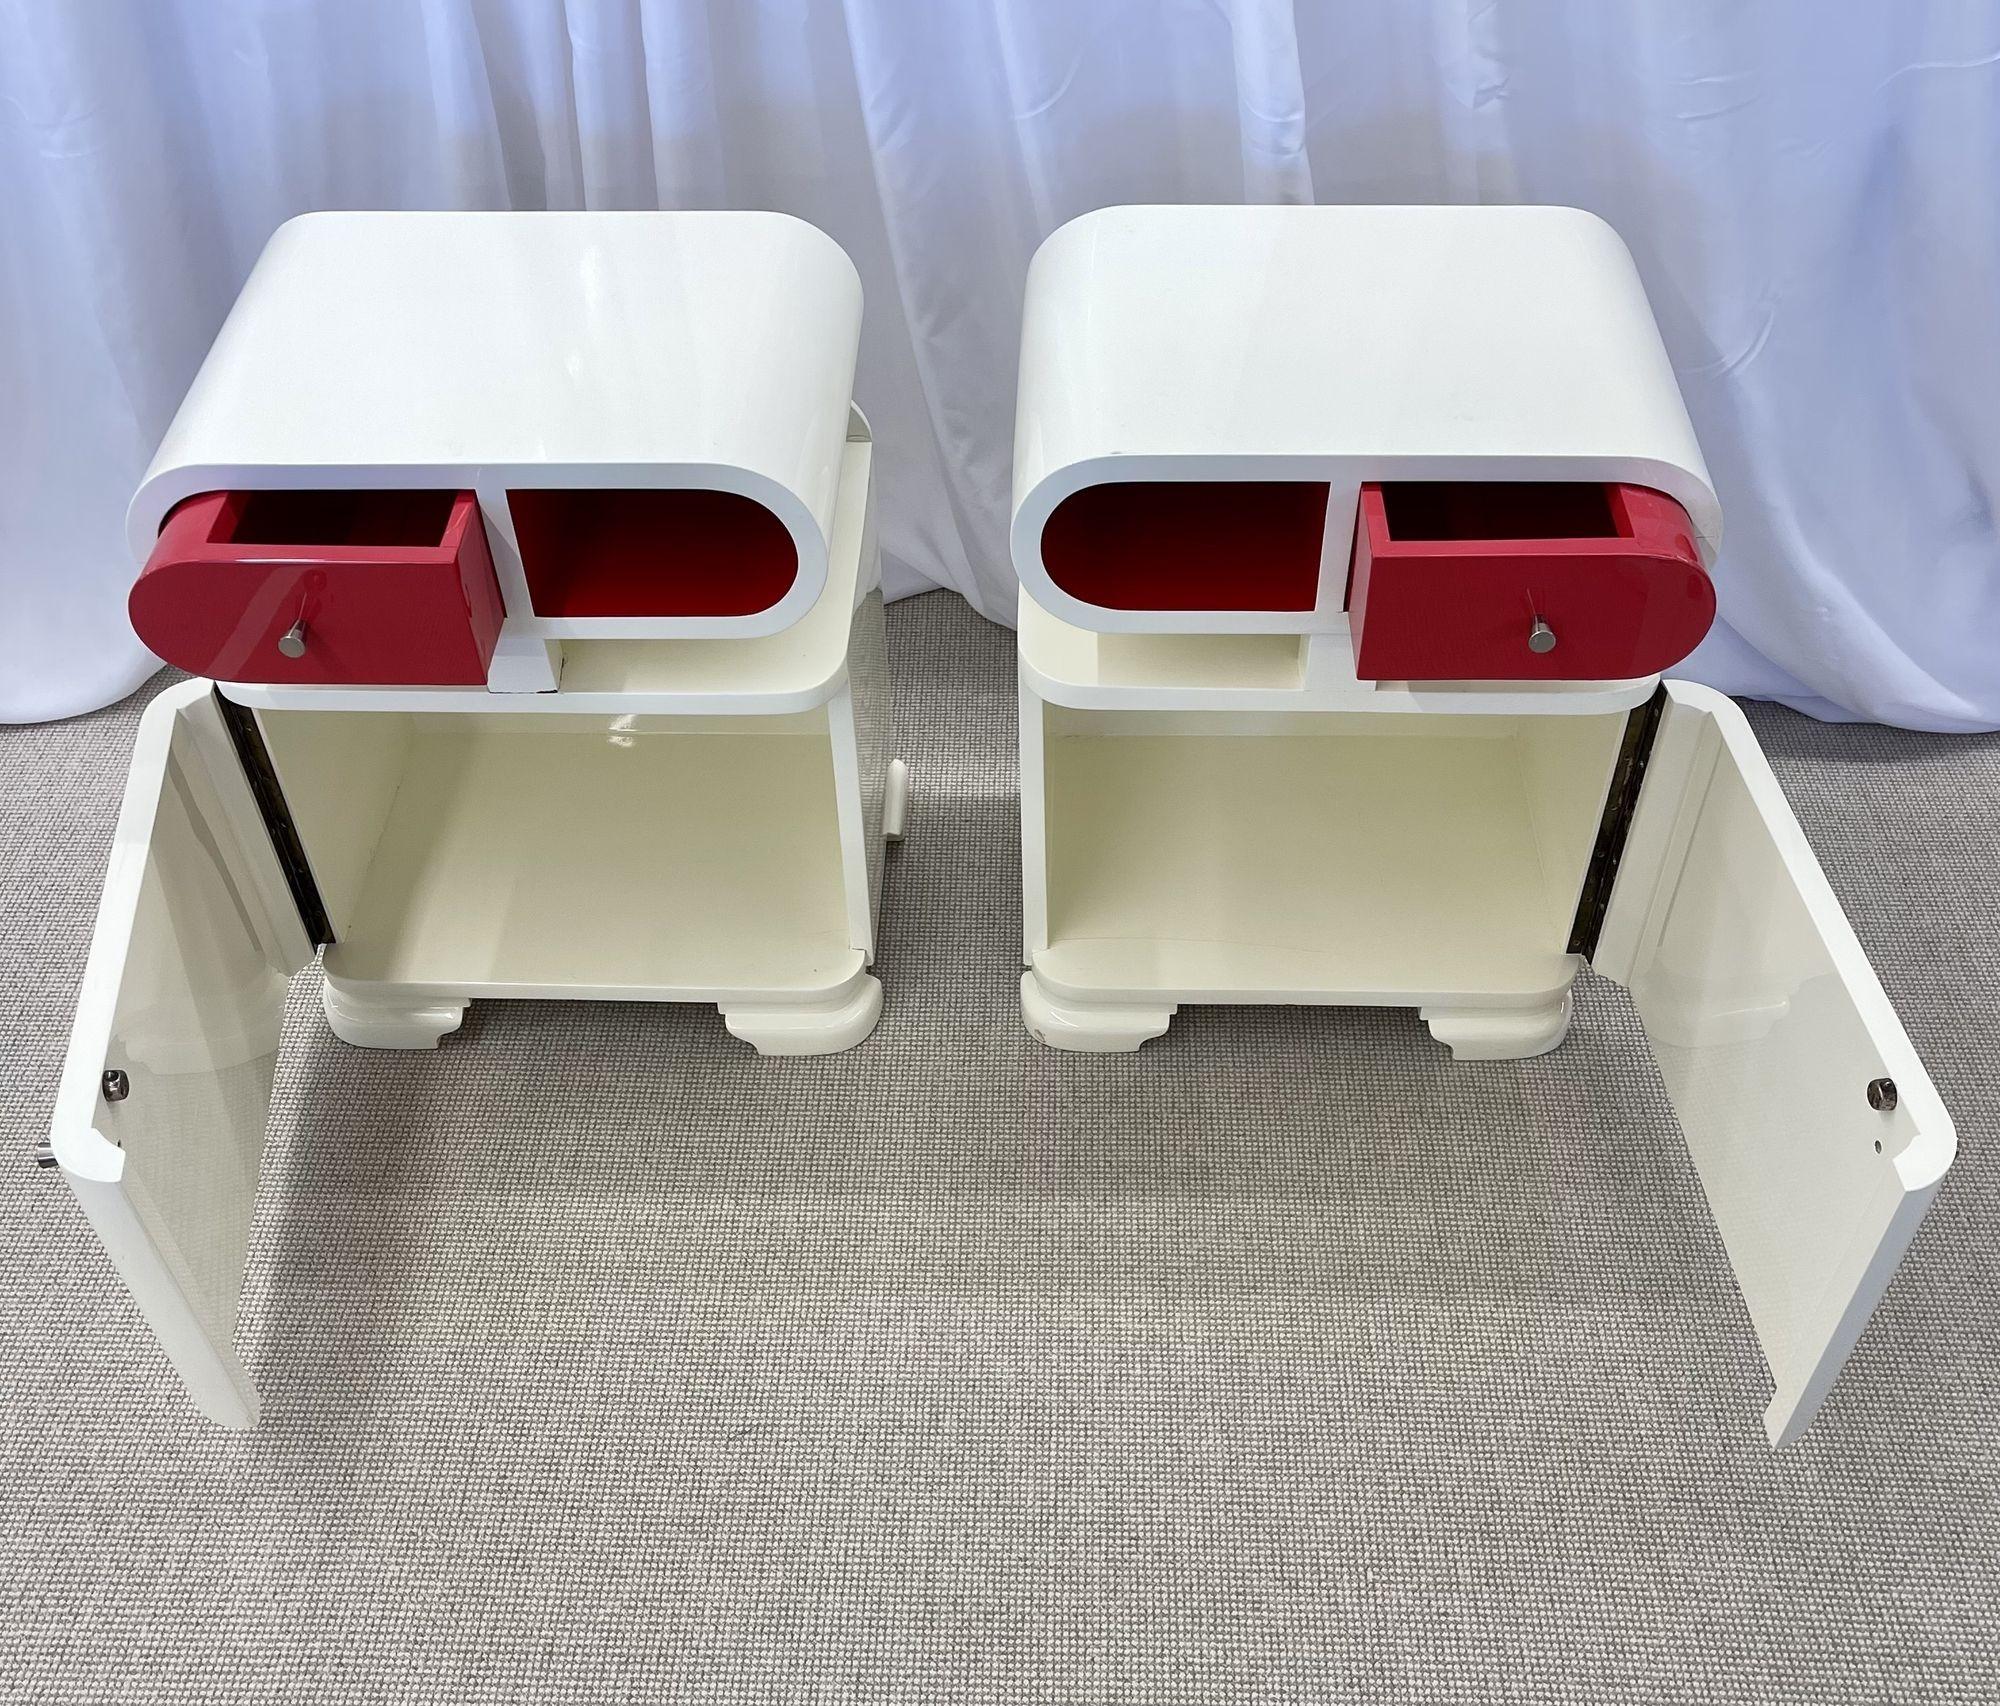 Mid-20th Century Pair of Art Deco Nightstands / End Tables, Lacquer, Space Age Modern Style